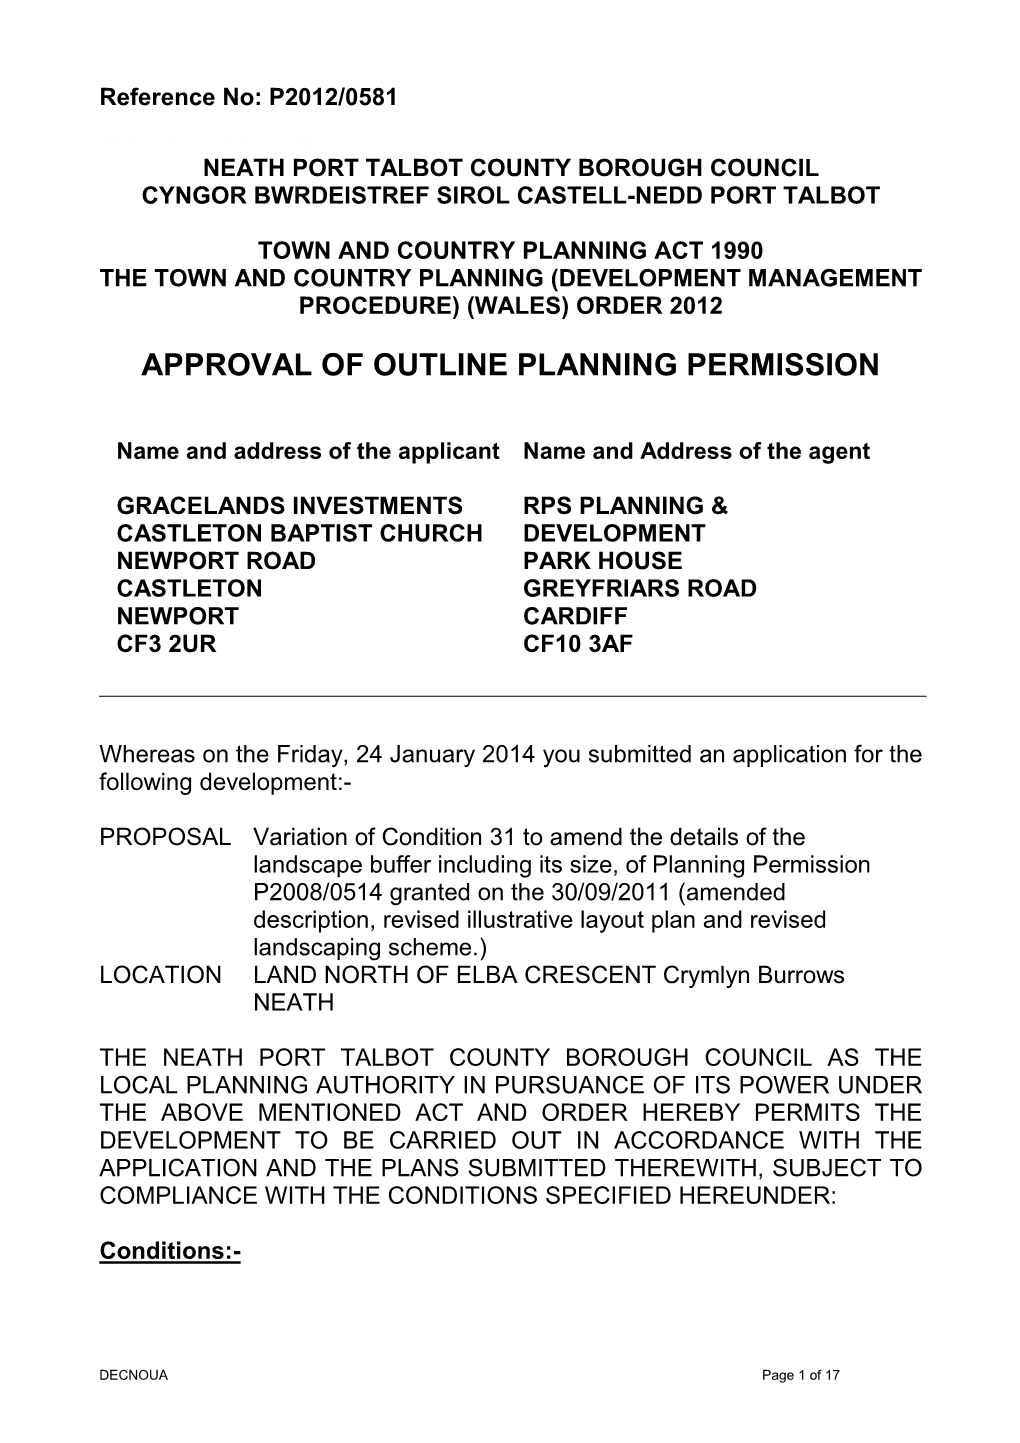 Approval of Outline Planning Permission